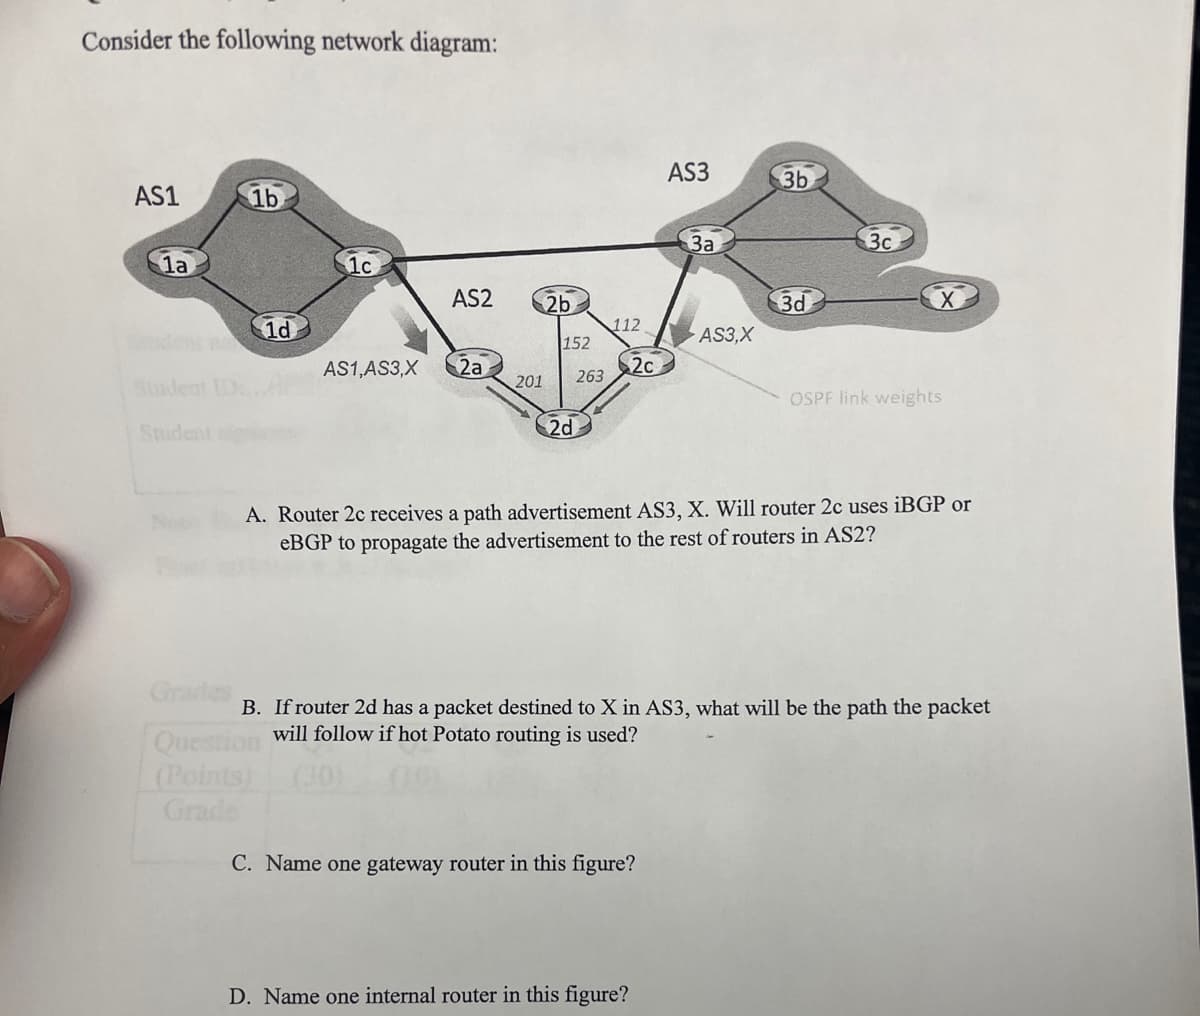 Consider the following network diagram:
AS1
1a
Student
1b
1d
Grades
Question
(Points)
Grade
1c
AS2 2b
AS1, AS3,X 2a
152
201 263
2d
112
2c
AS3
C. Name one gateway router in this figure?
D. Name one internal router in this figure?
3a
AS3,X
3b
3d
3c
A. Router 2c receives a path advertisement AS3, X. Will router 2c uses iBGP or
eBGP to propagate the advertisement to the rest of routers in AS2?
X
OSPF link weights
B. If router 2d has a packet destined to X in AS3, what will be the path the packet
will follow if hot Potato routing is used?